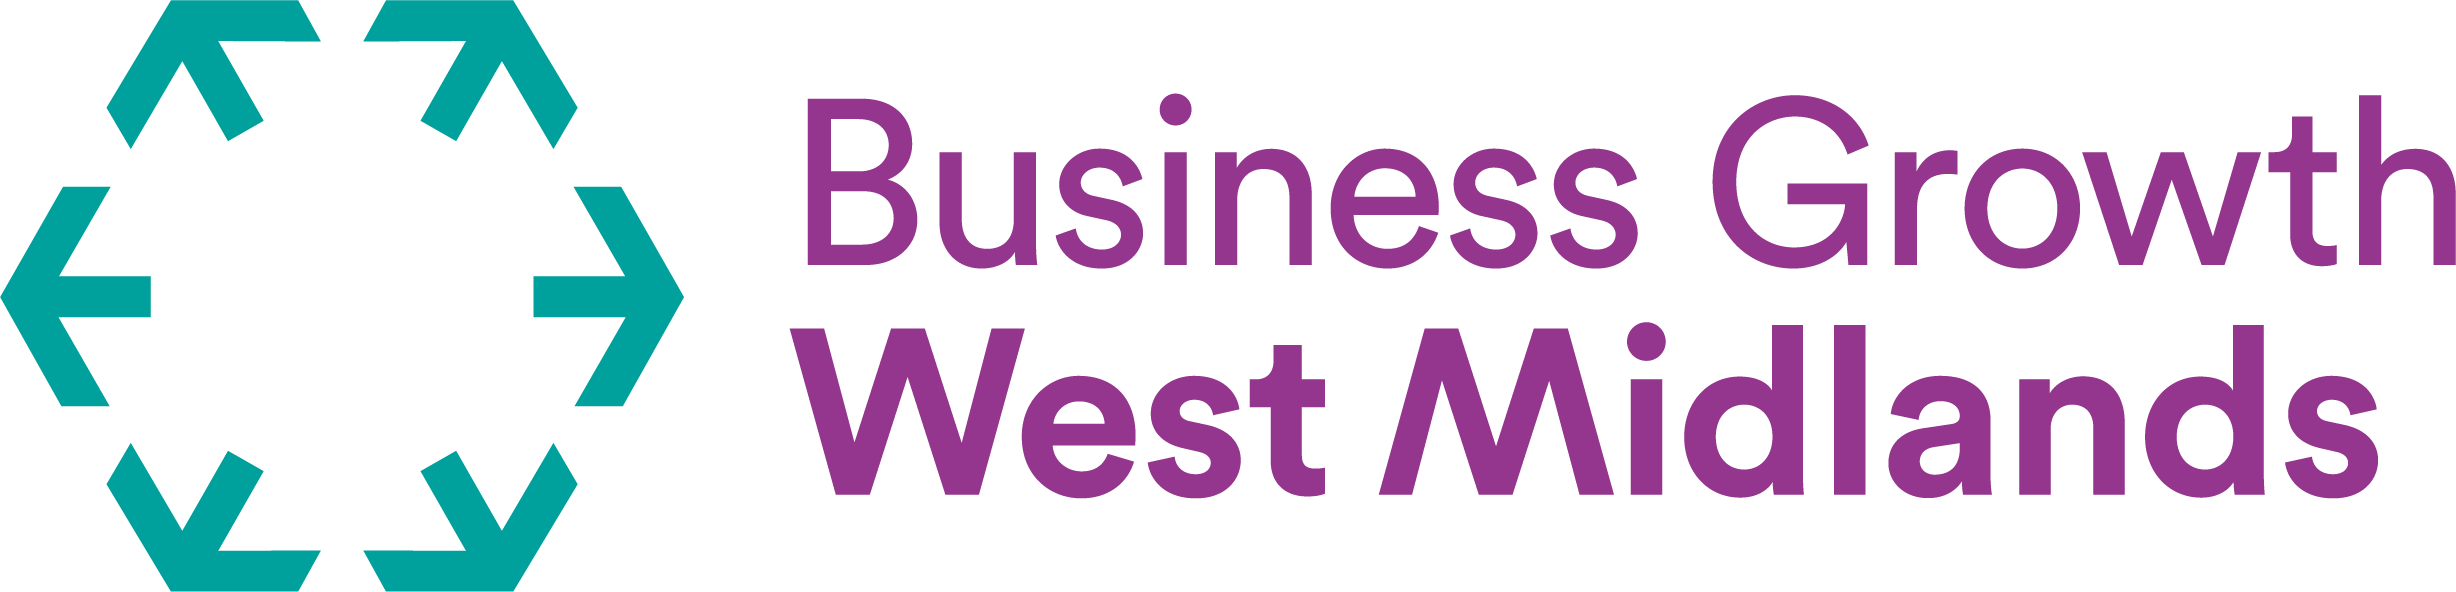 Business Growth West Midlands